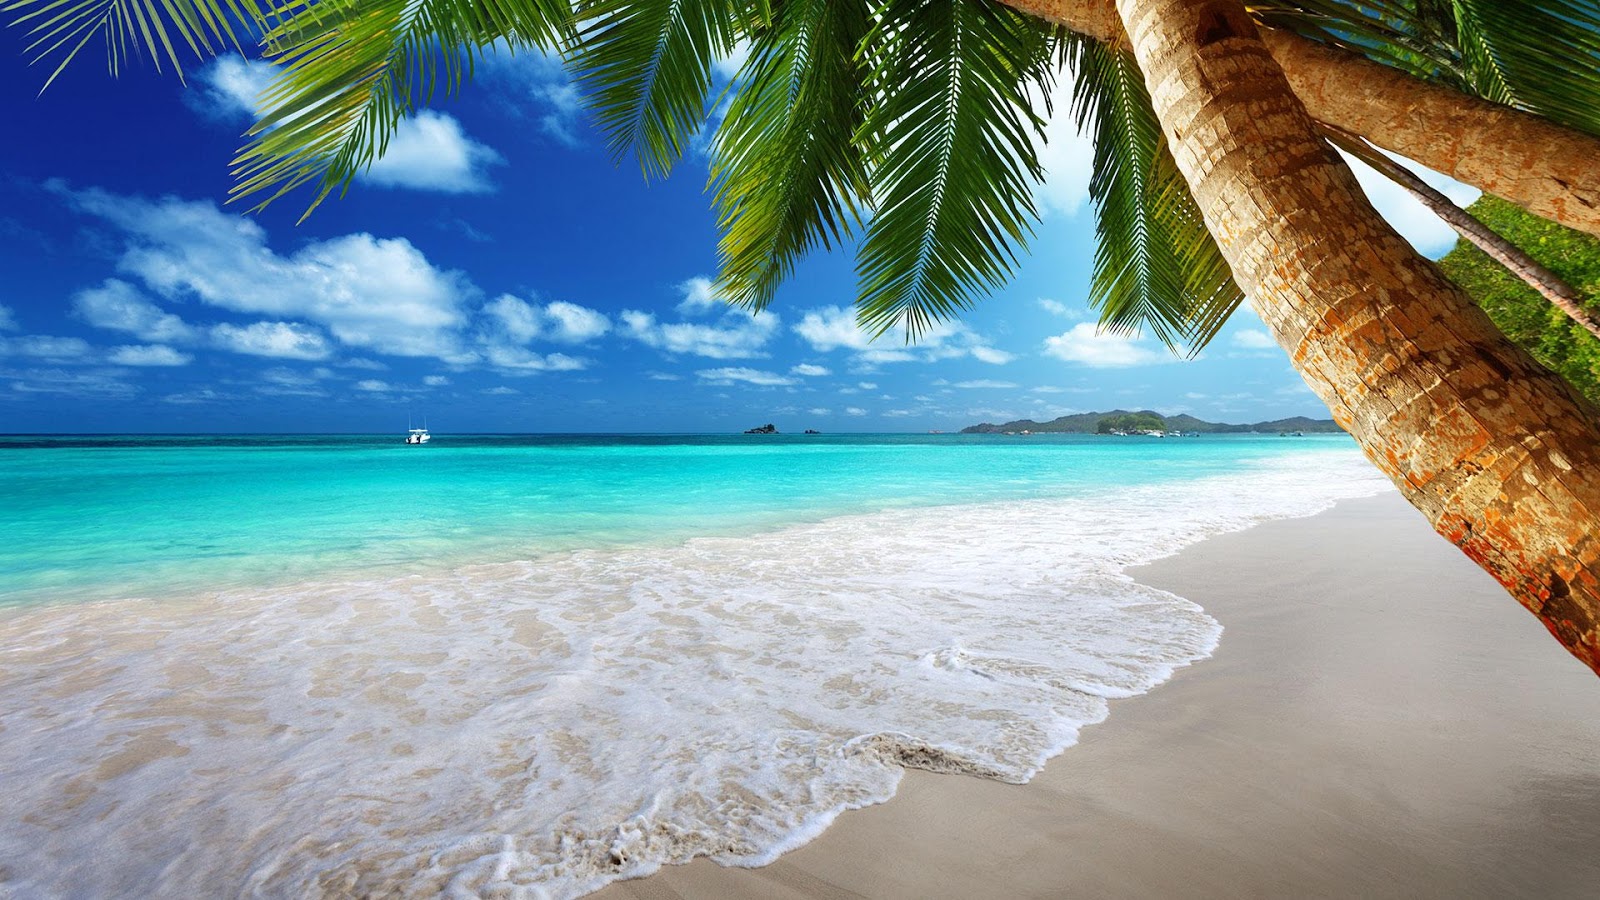 Beach Live Wallpaper - Android Apps on Google Play